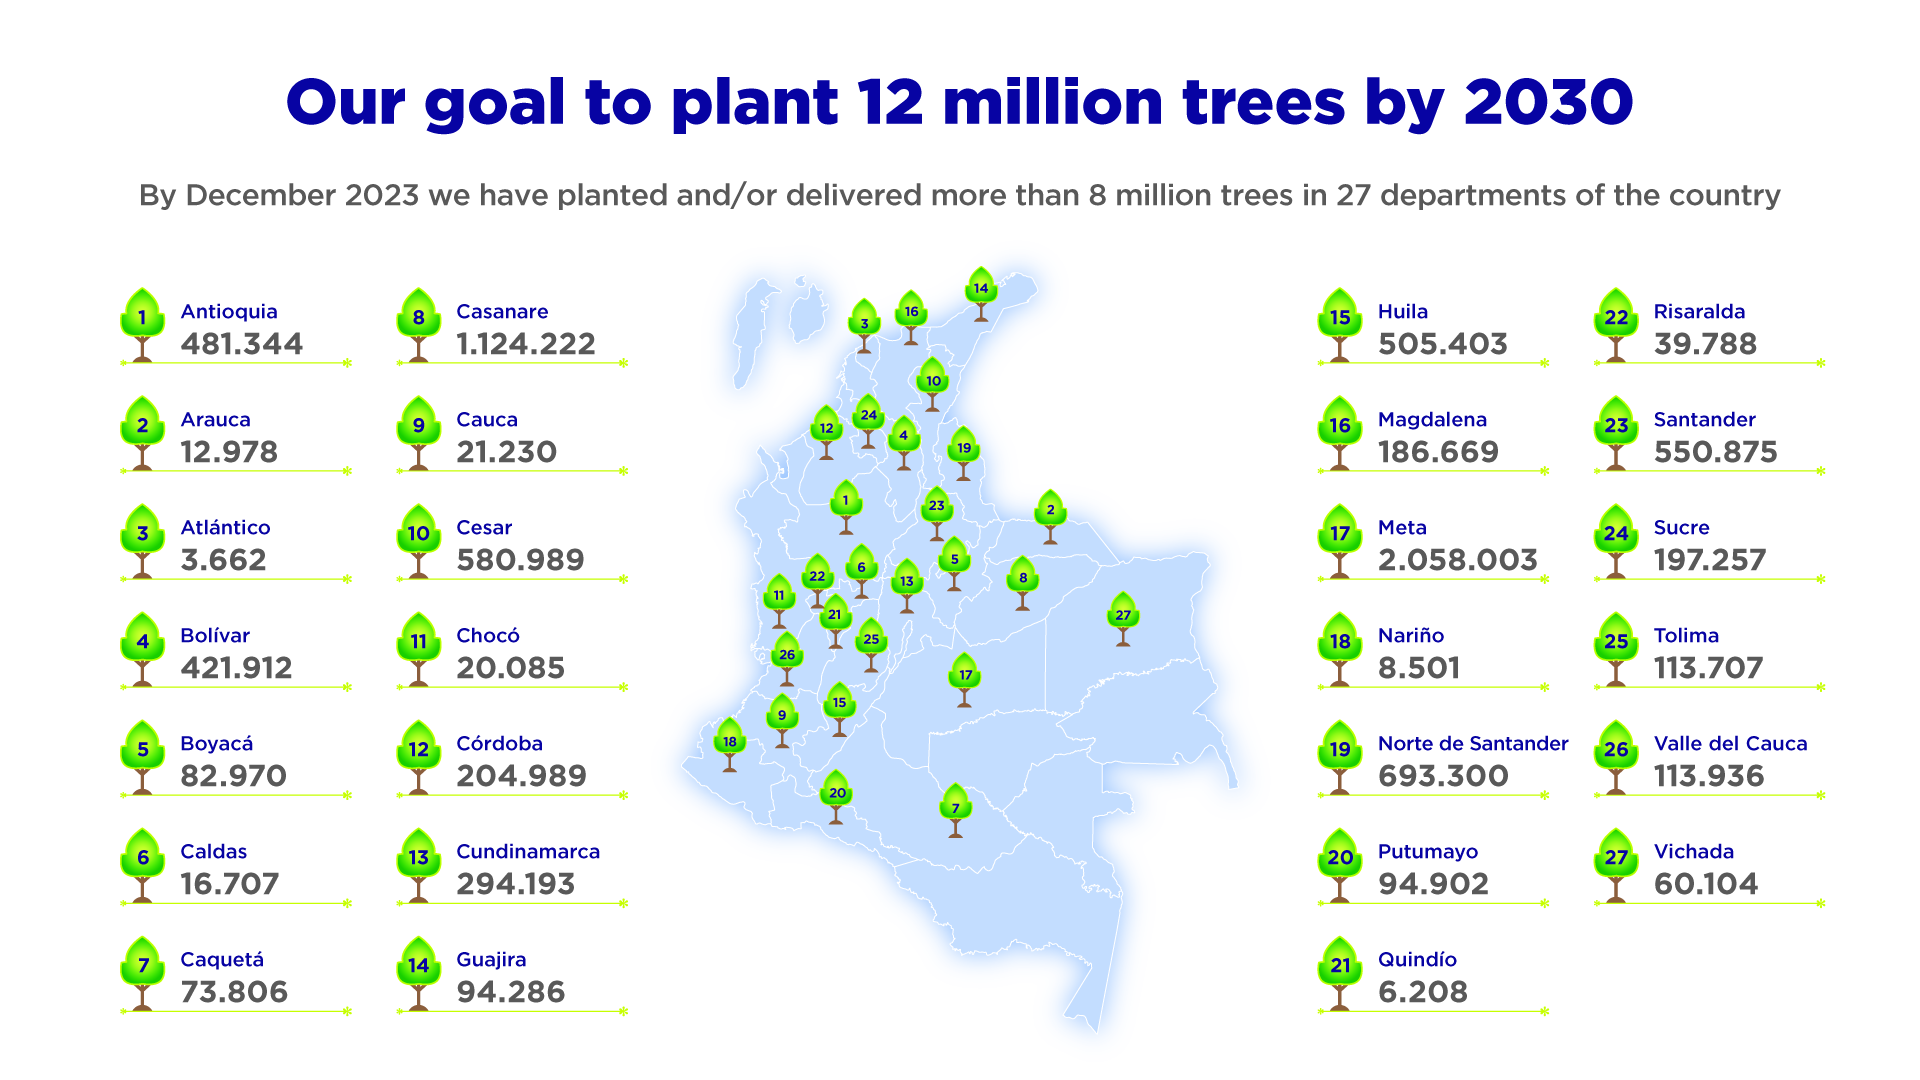 Our goal to plant 12 million trees by 2030